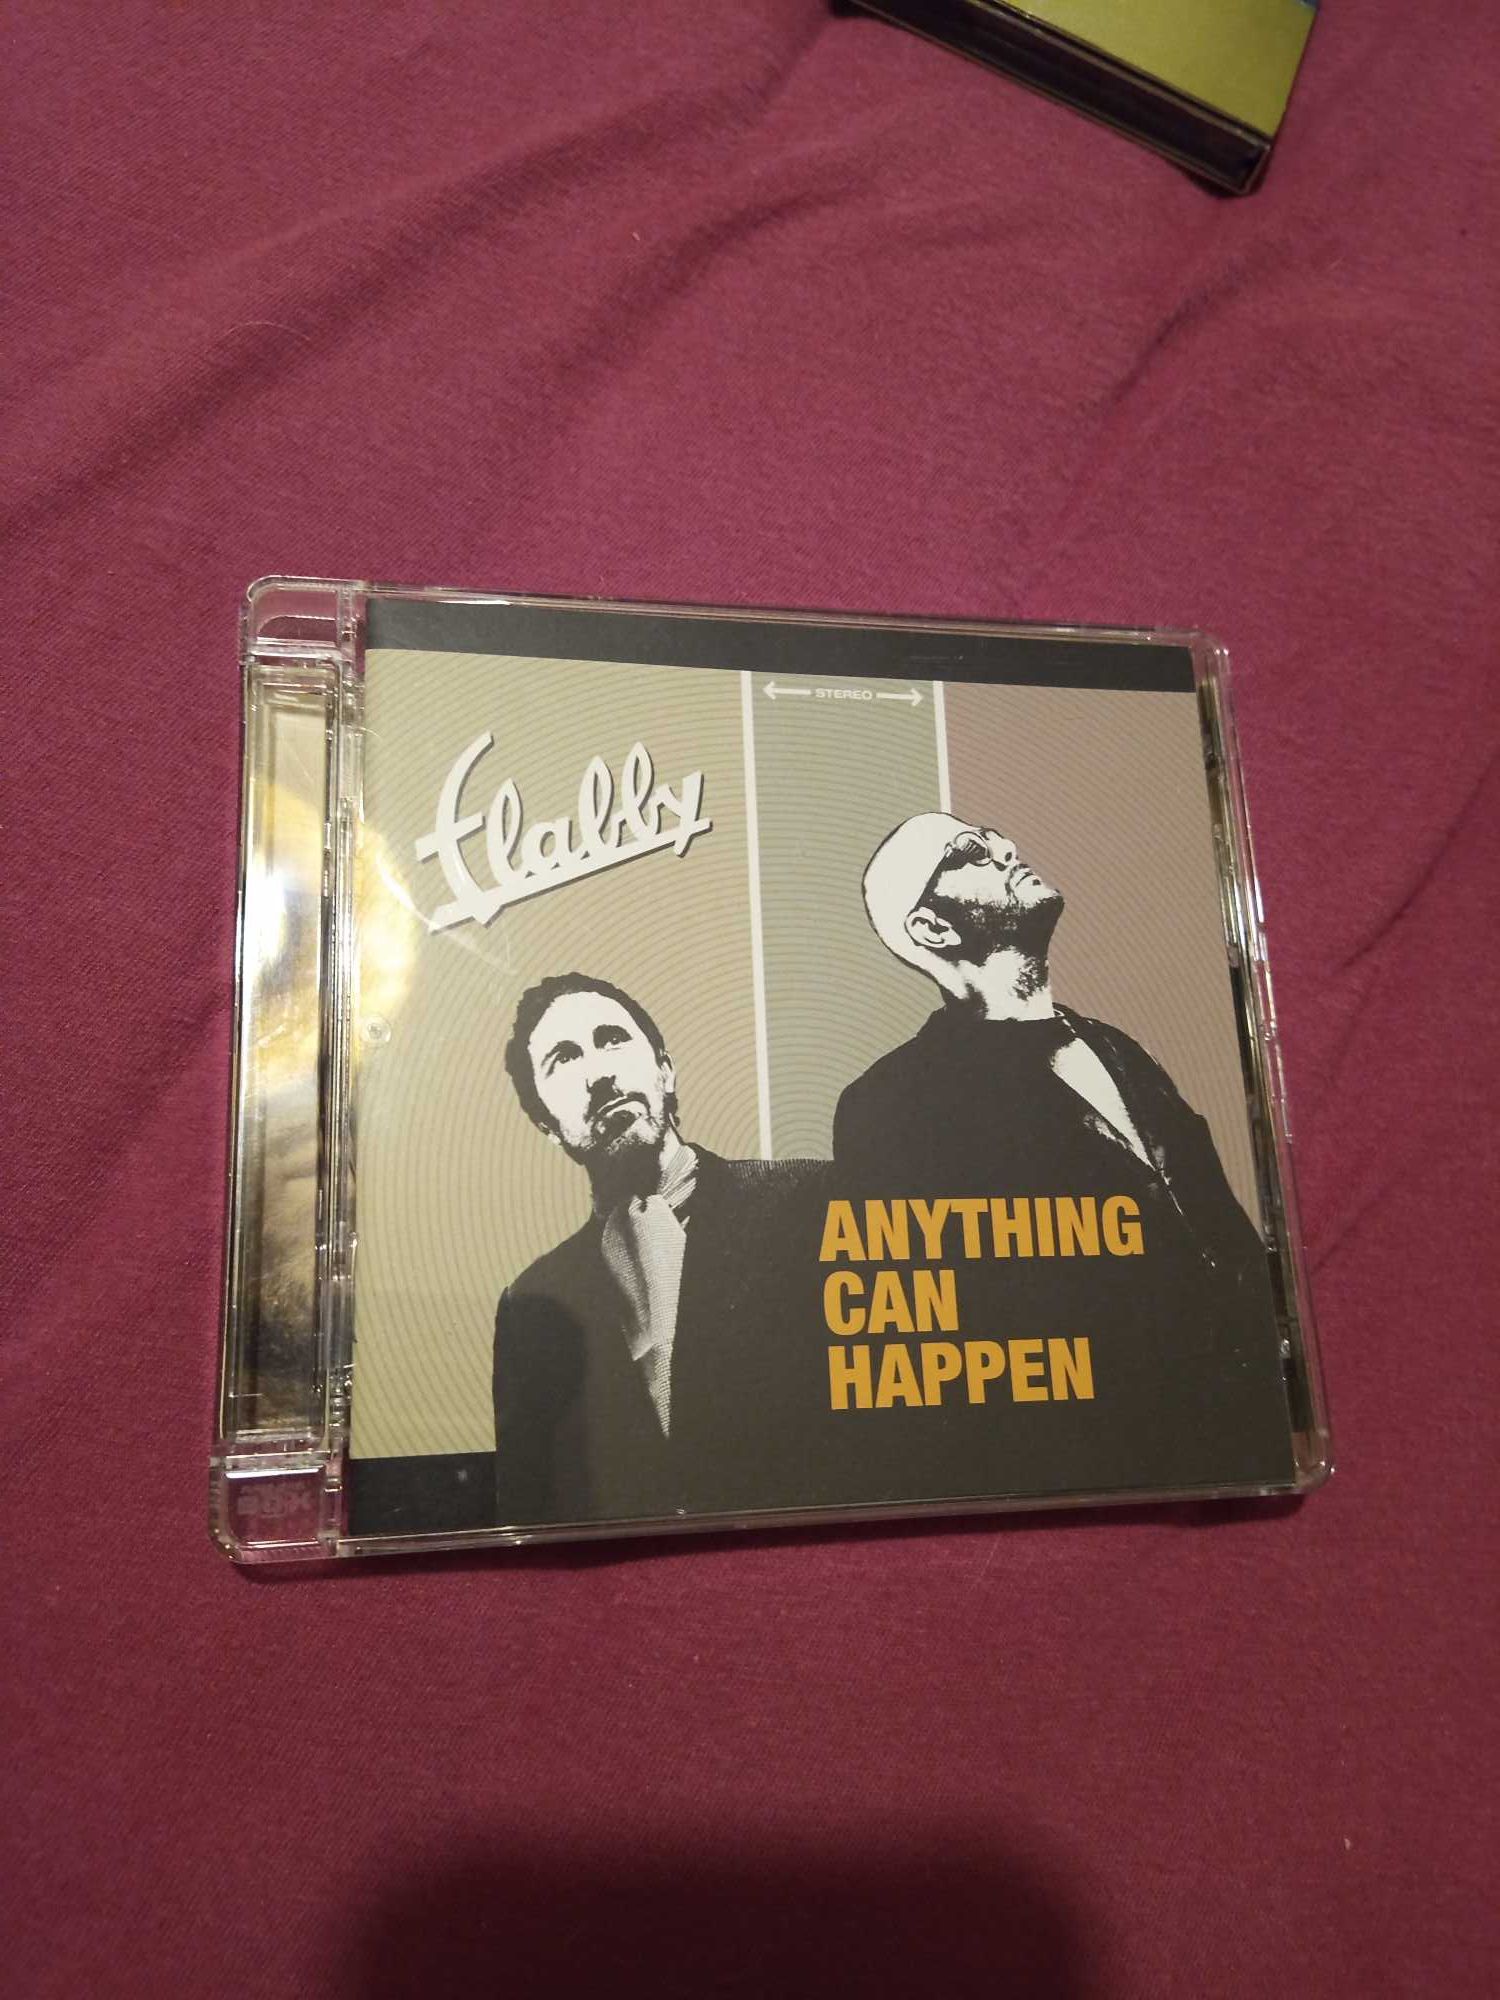 Flabby - Anything can happen CD